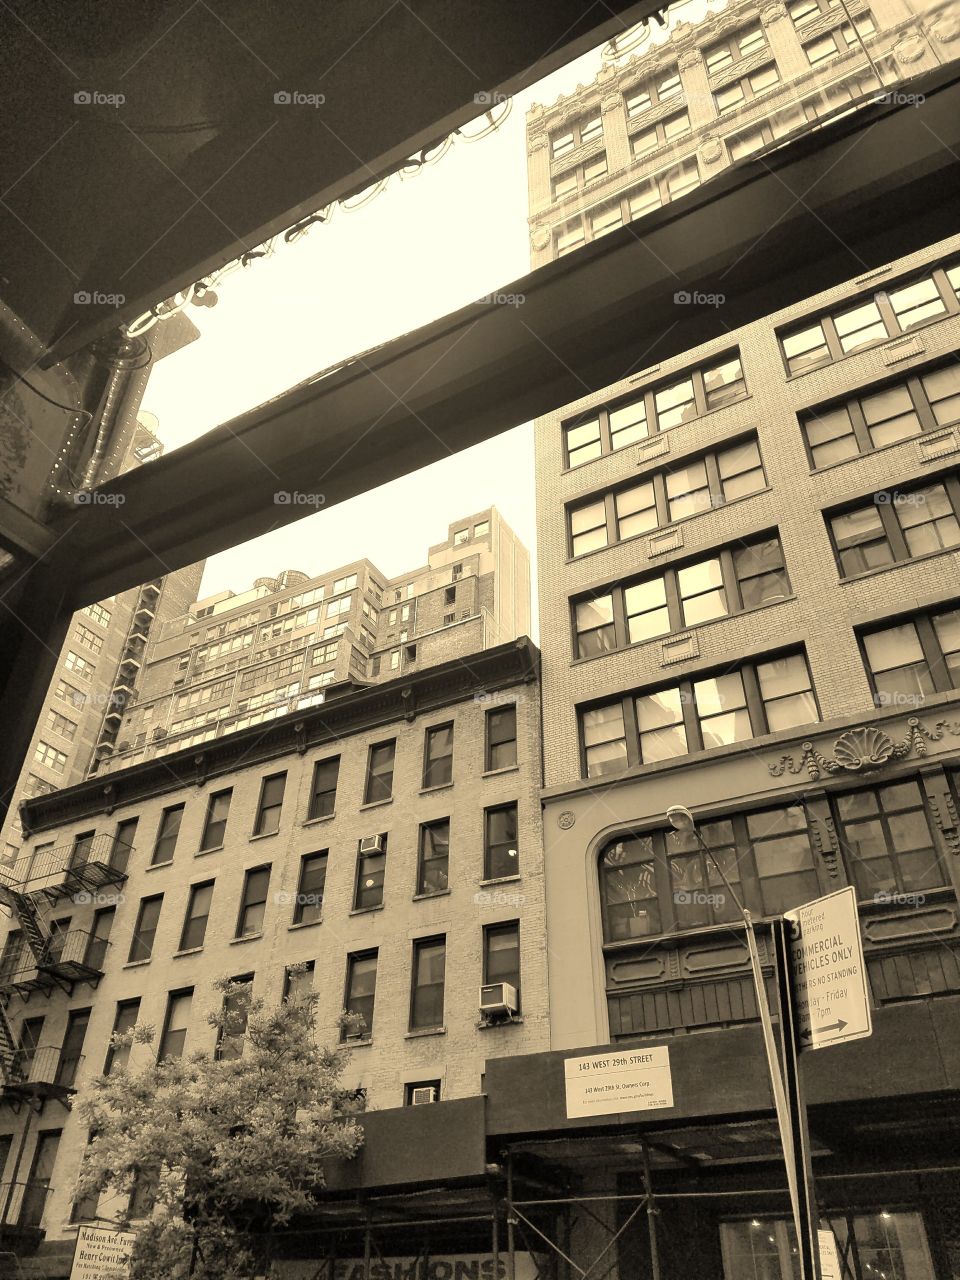 View from Pioneers Bar in Lower Manhattan - 29th between 6th and 7th - in Sepia - May 12th 2017